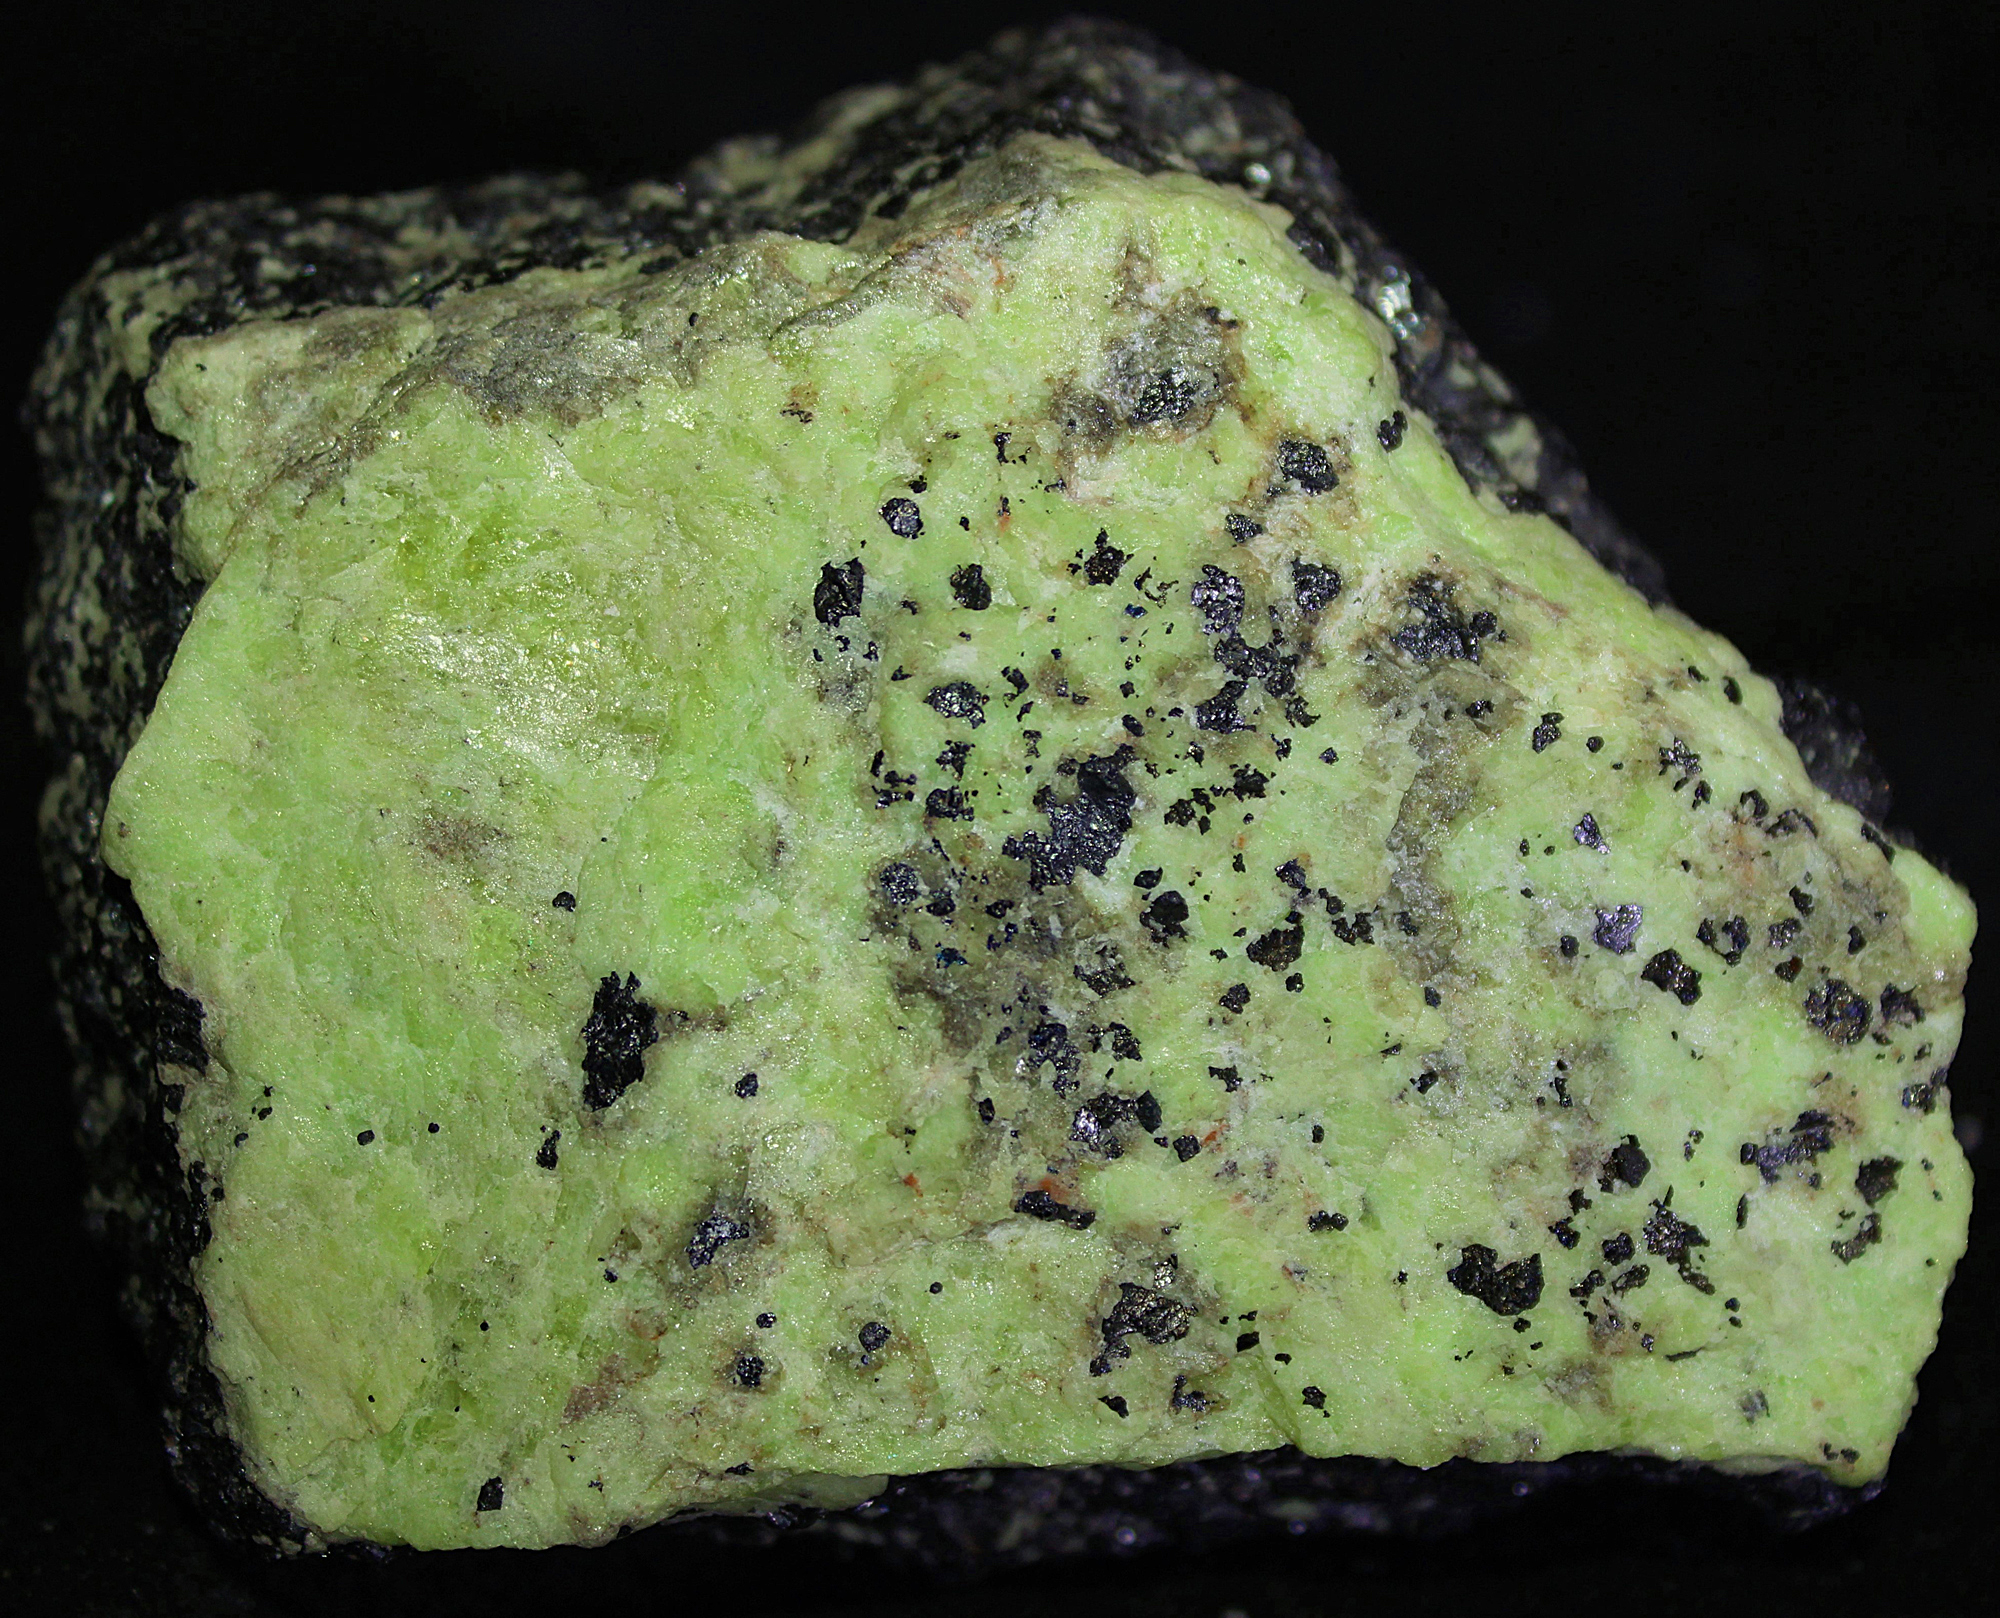 Green willemite, glaucochroite and franklinite, from Franklin, NJ.